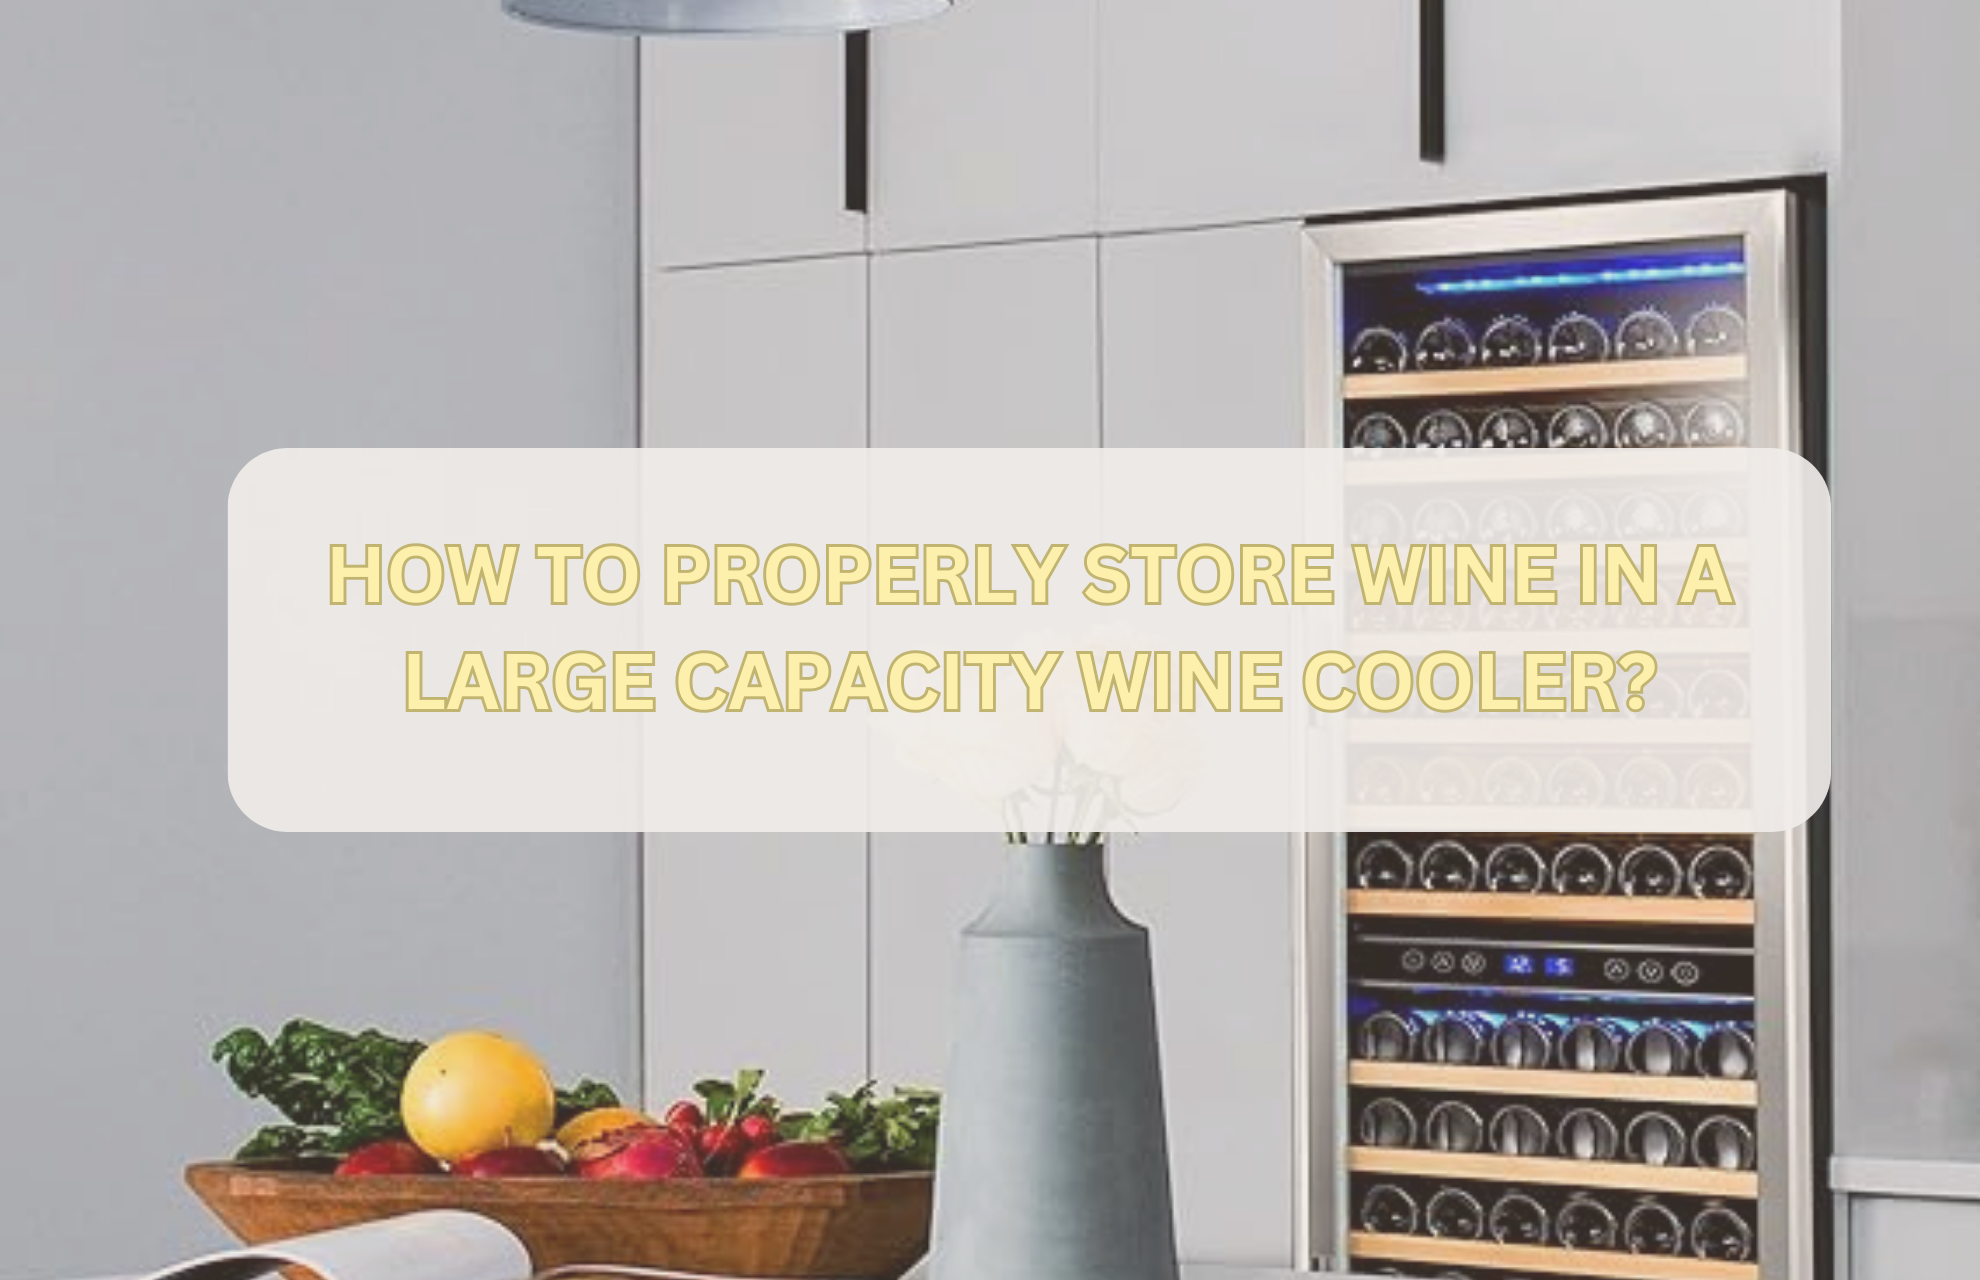 HOW TO PROPERLY STORE WINE IN A LARGE CAPACITY WINE COOLER